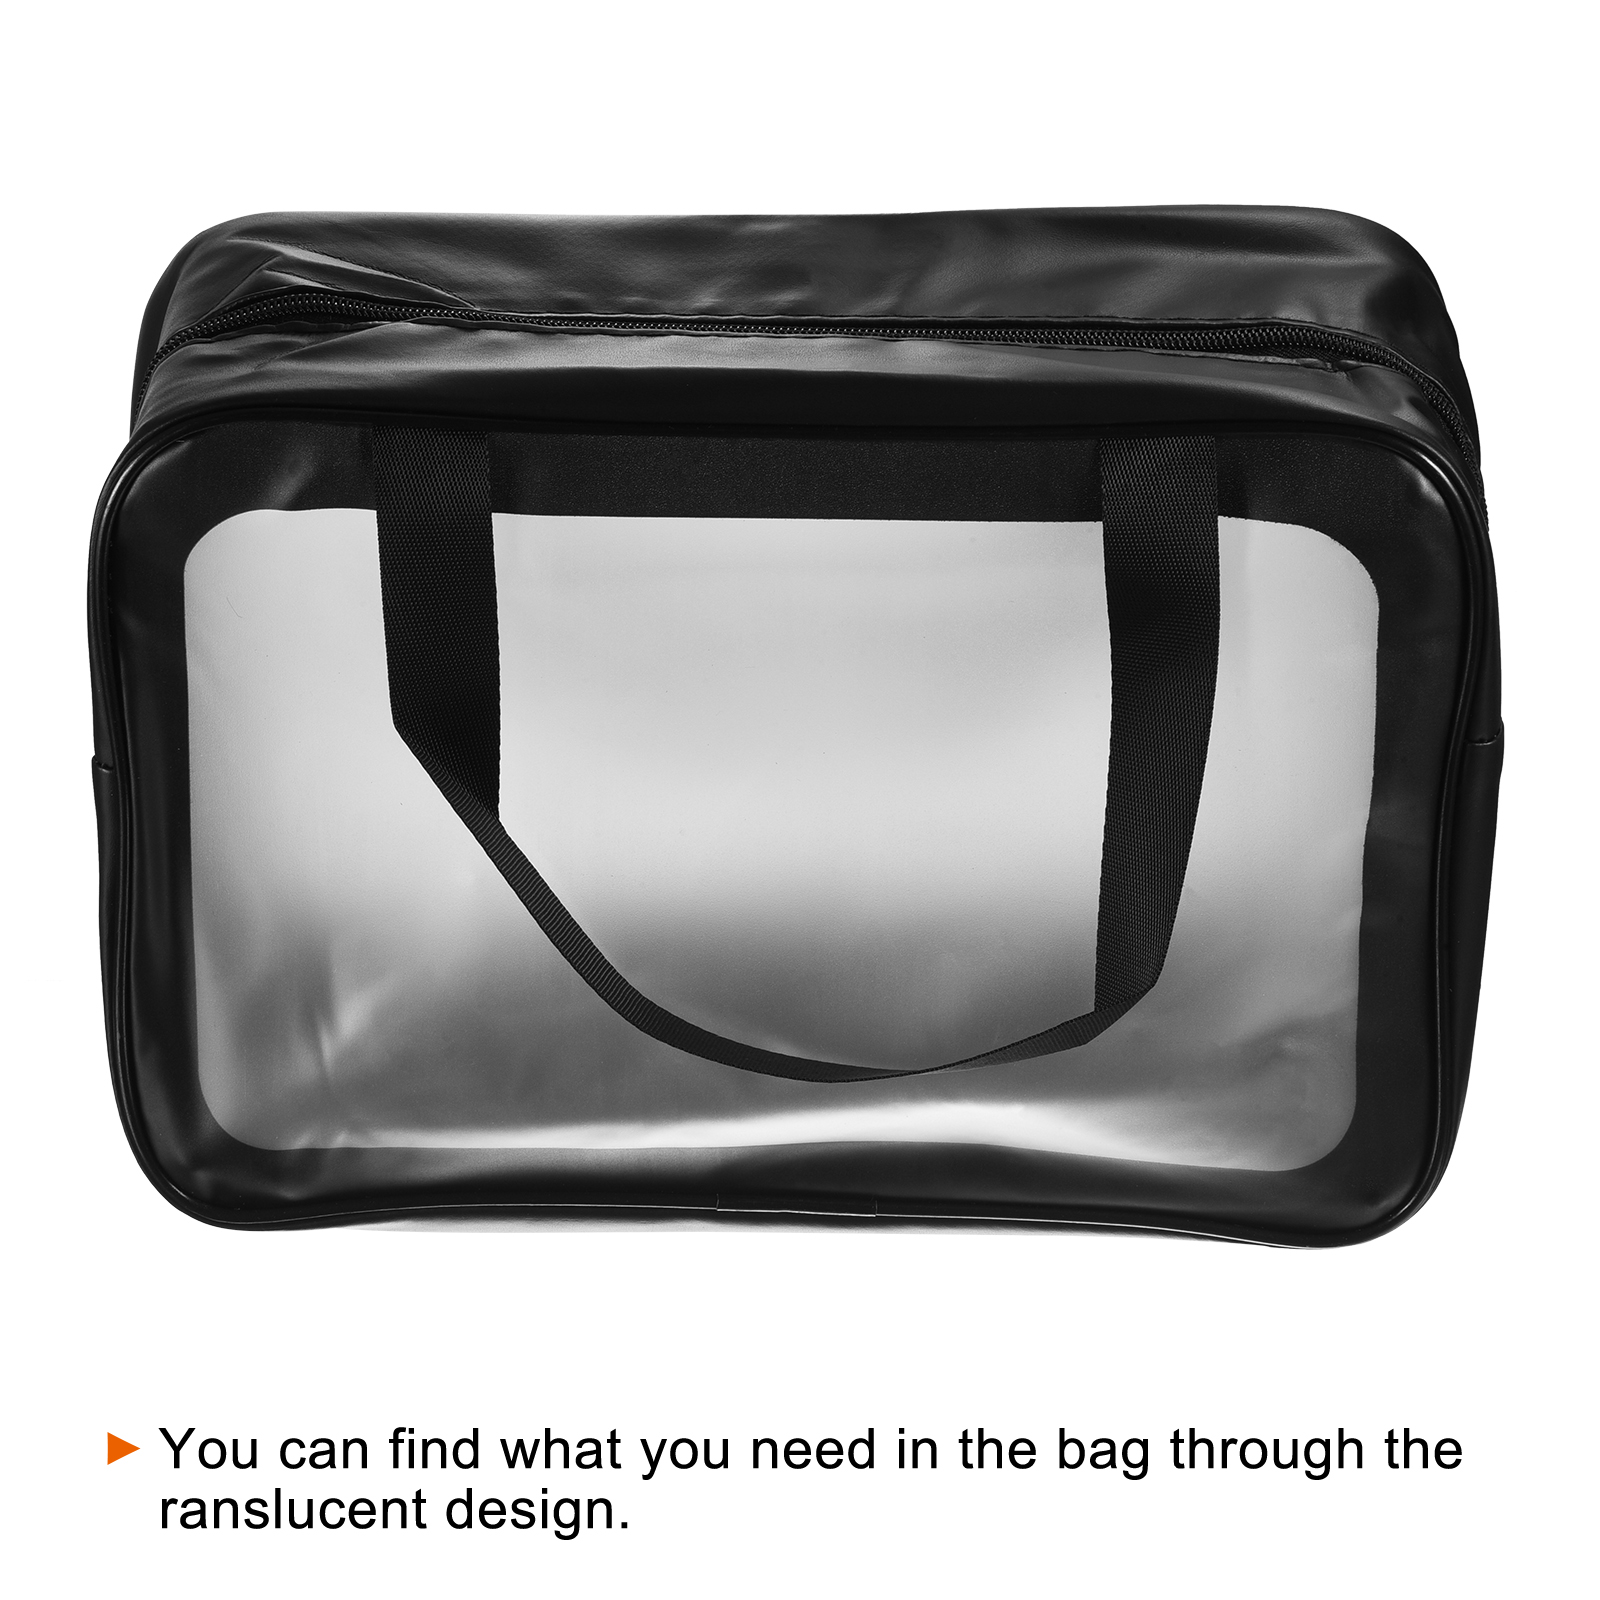 Uxcell 8.3"x11.8"x5.1" PVC Clear Toiletry Bag Makeup Bags with Zipper Handle Black 3 Pack - image 3 of 5